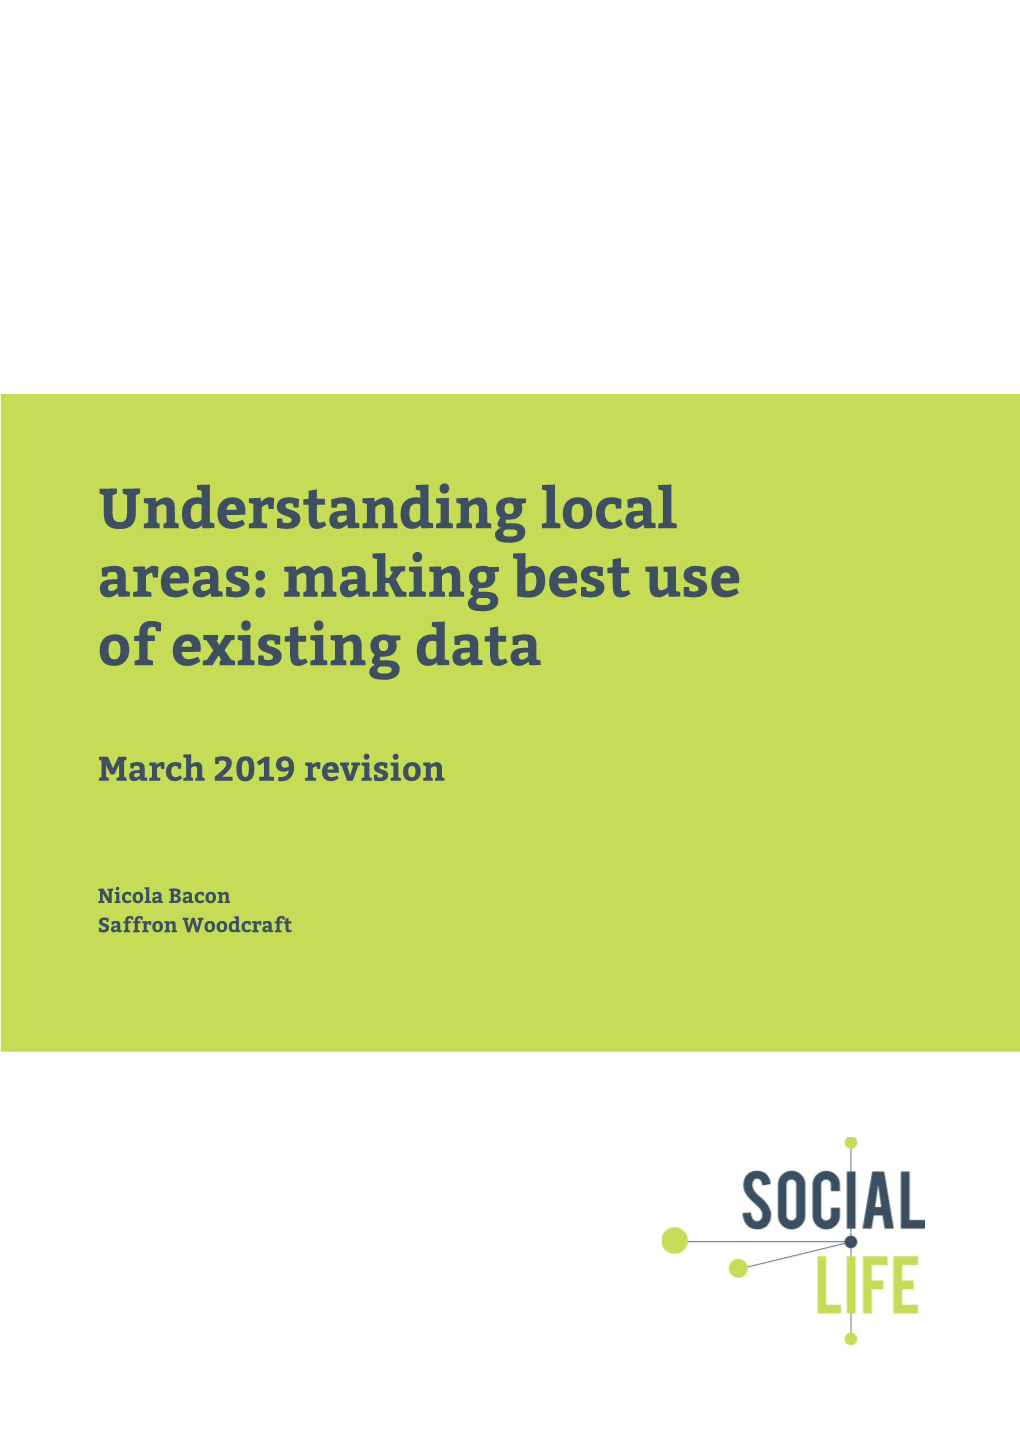 Understanding Local Areas: Making Best Use of Existing Data